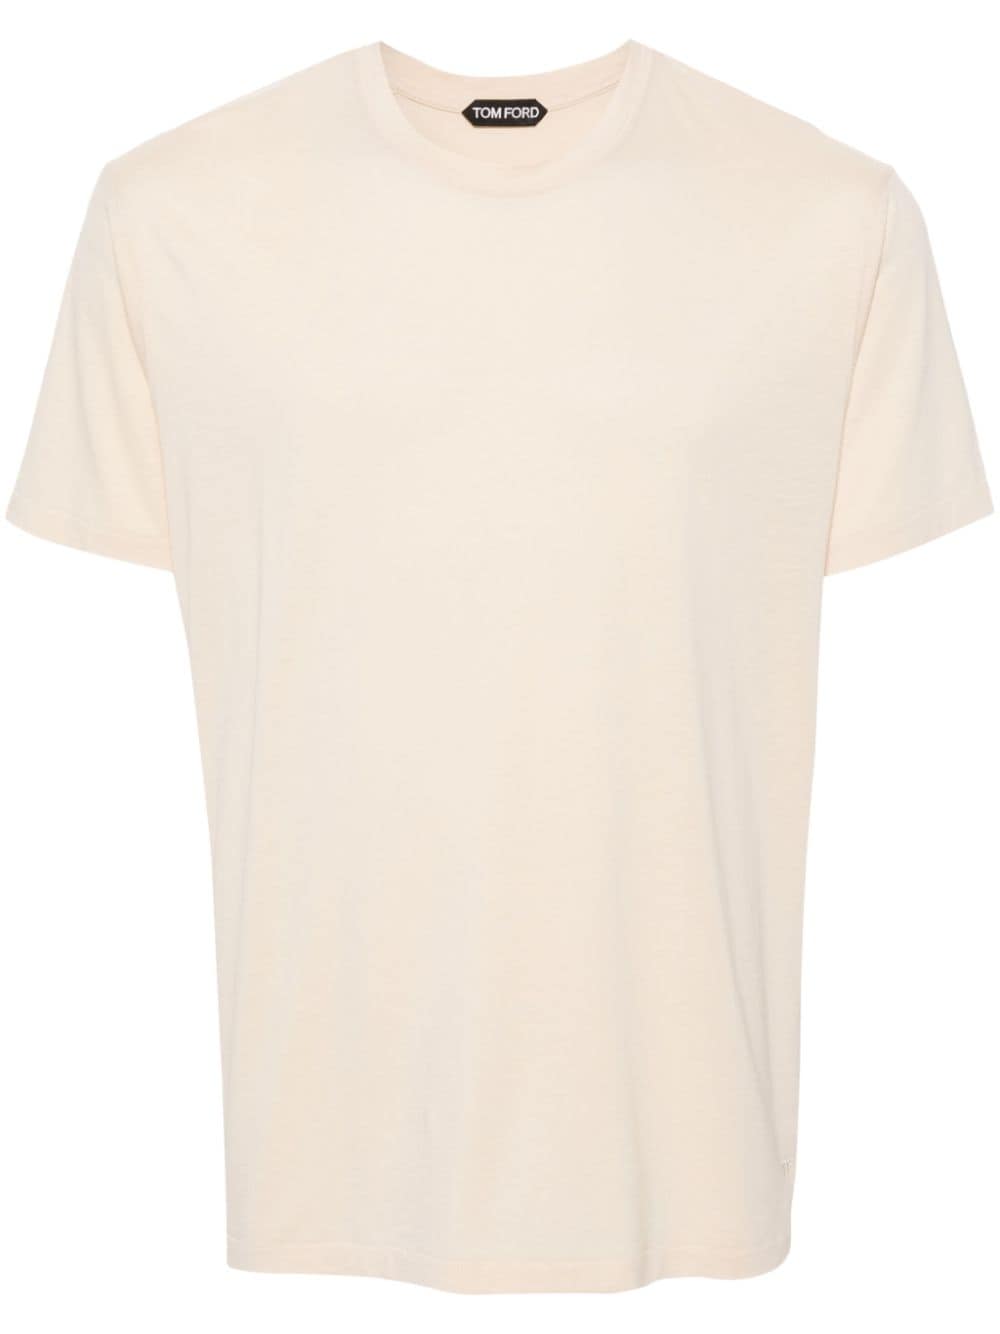 TOM FORD crew-neck short-sleeve T-shirt - Yellow von TOM FORD